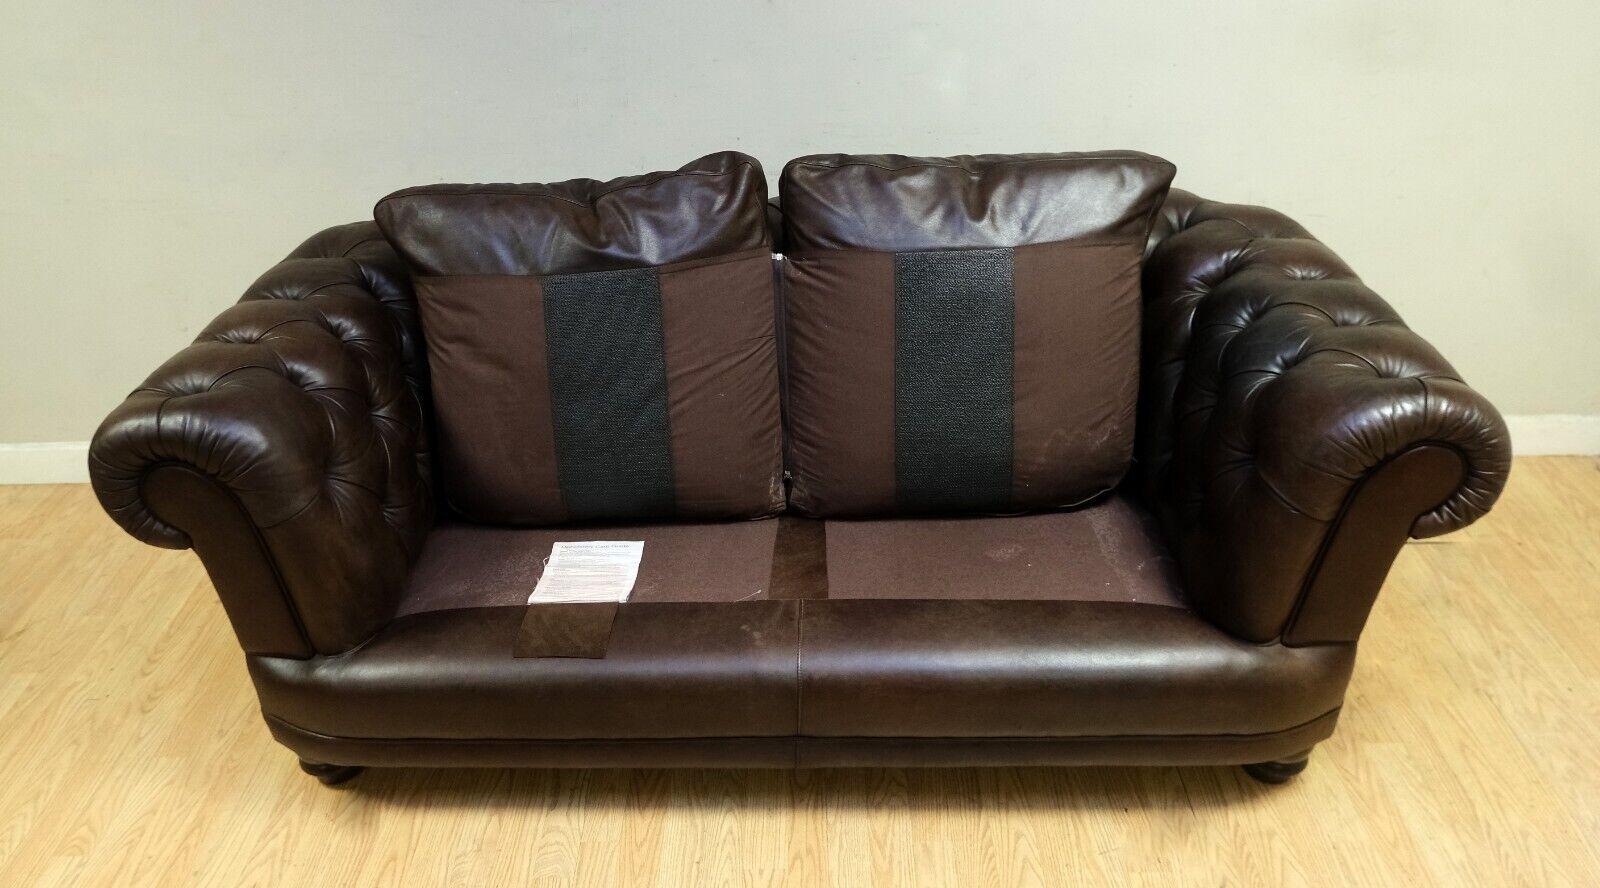 Choclate Brown Chesterfield Two Seater Leather Sofa Feather Filled Cushions 13